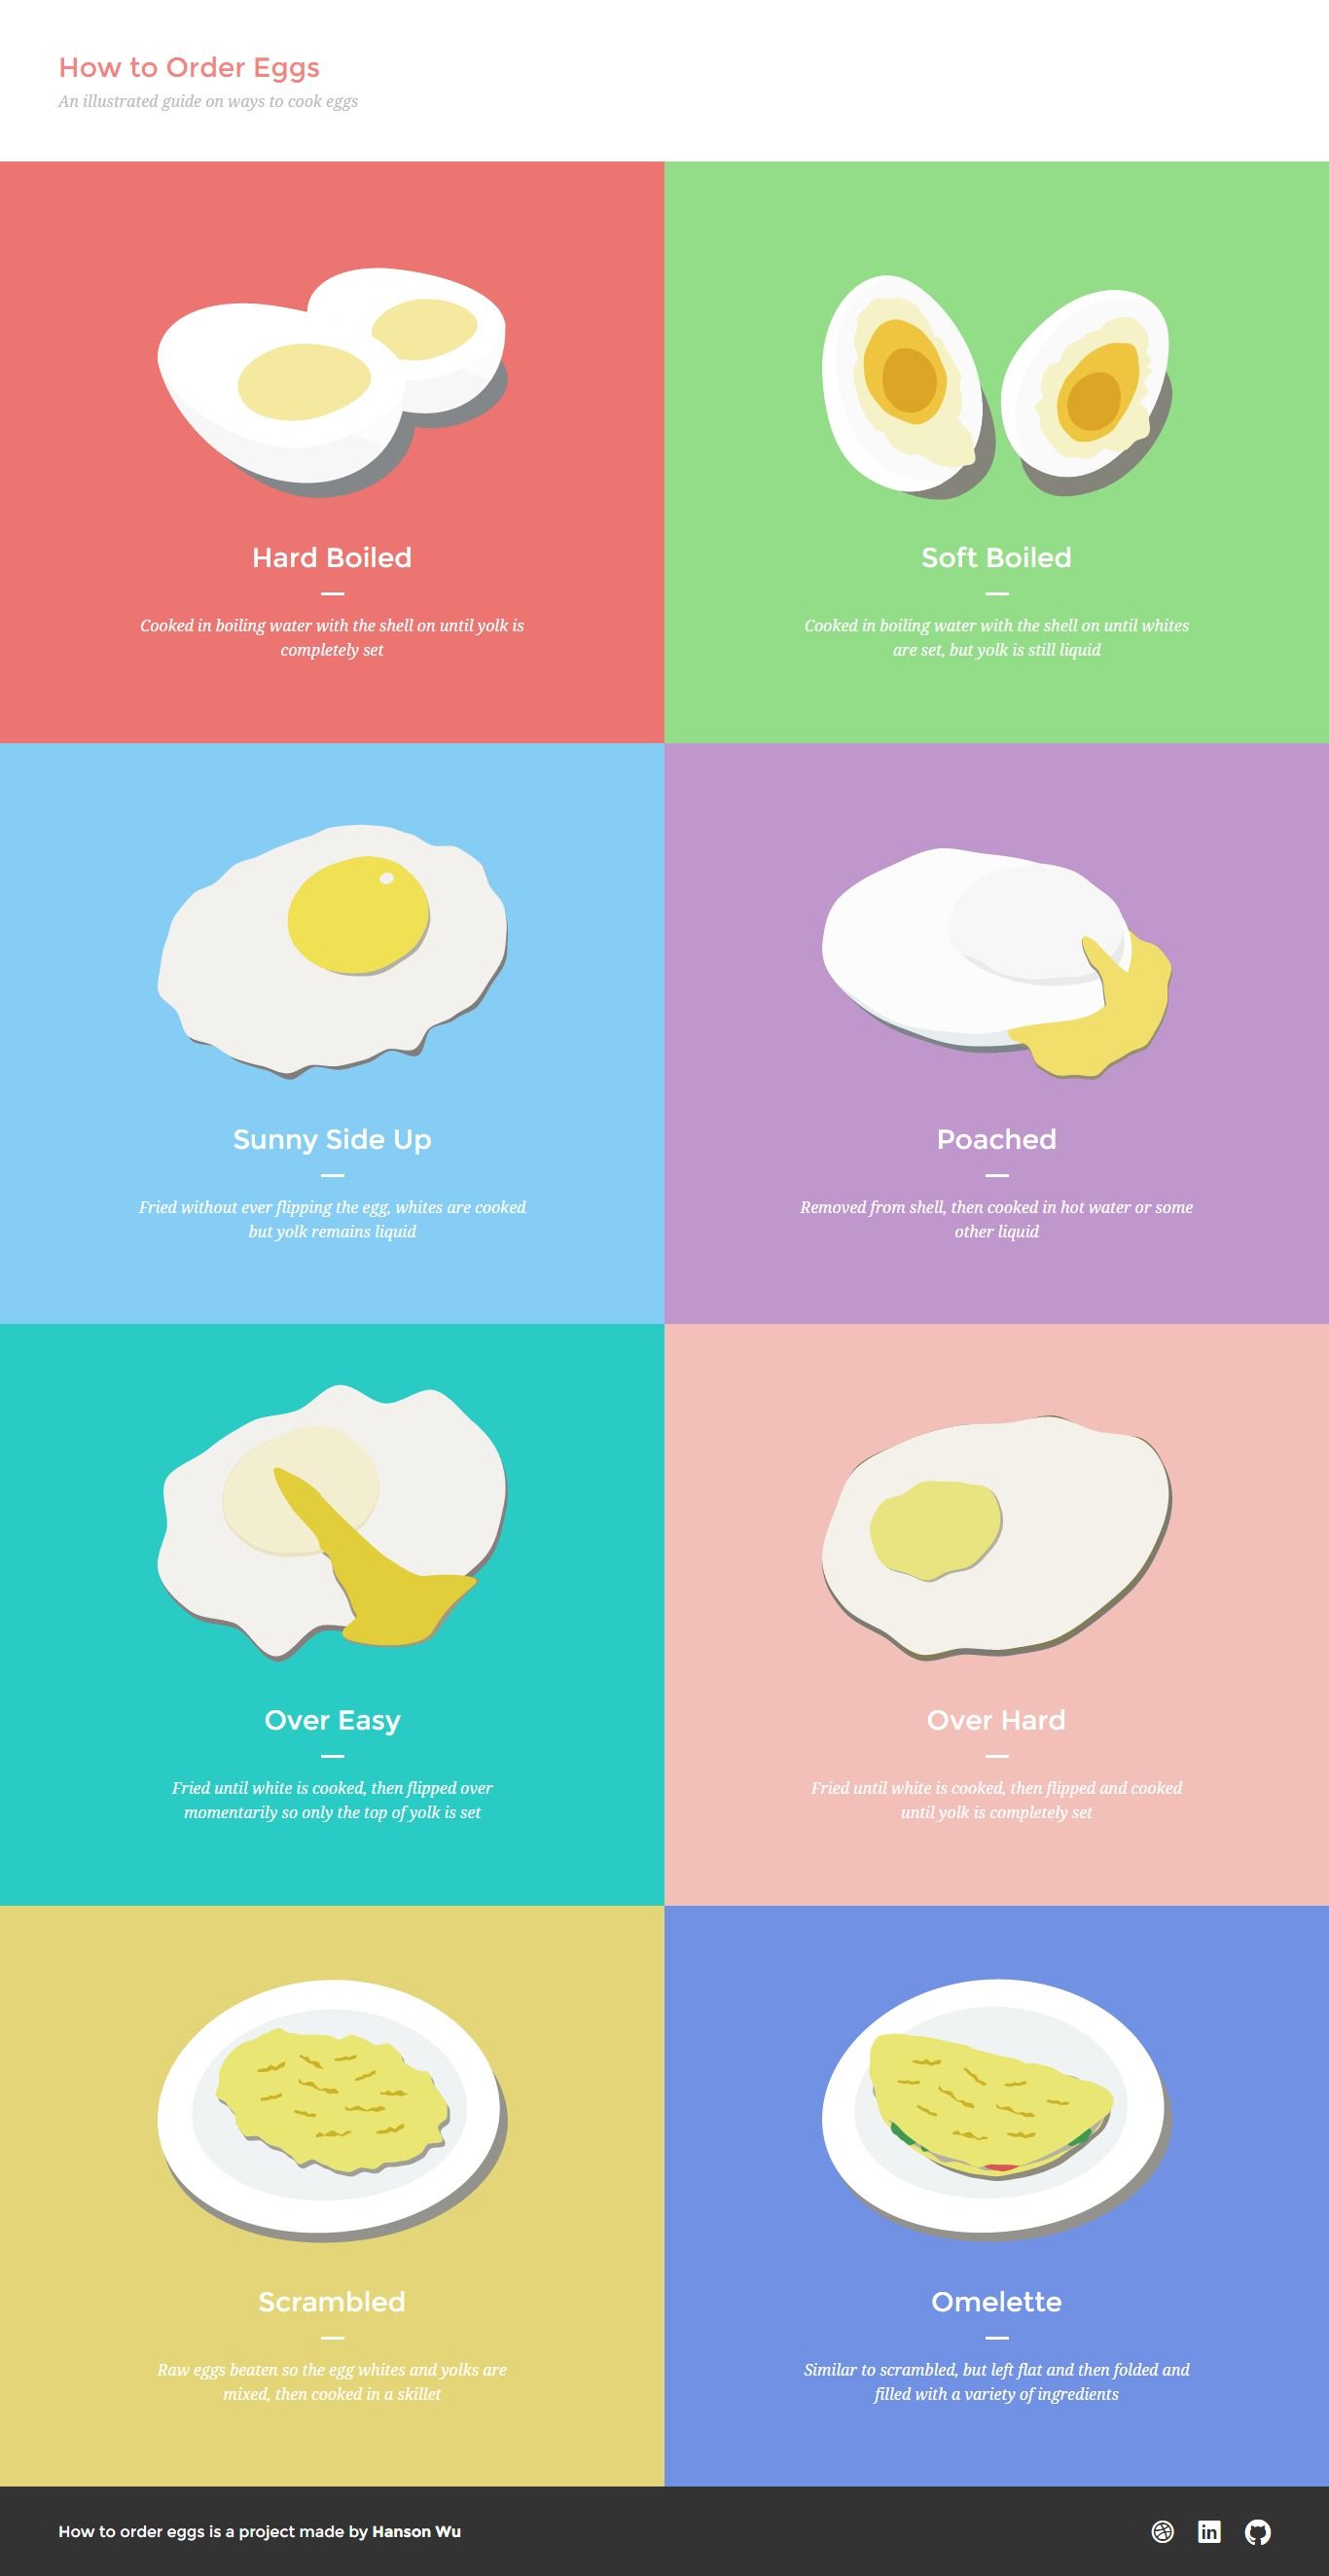 How to Order Eggs